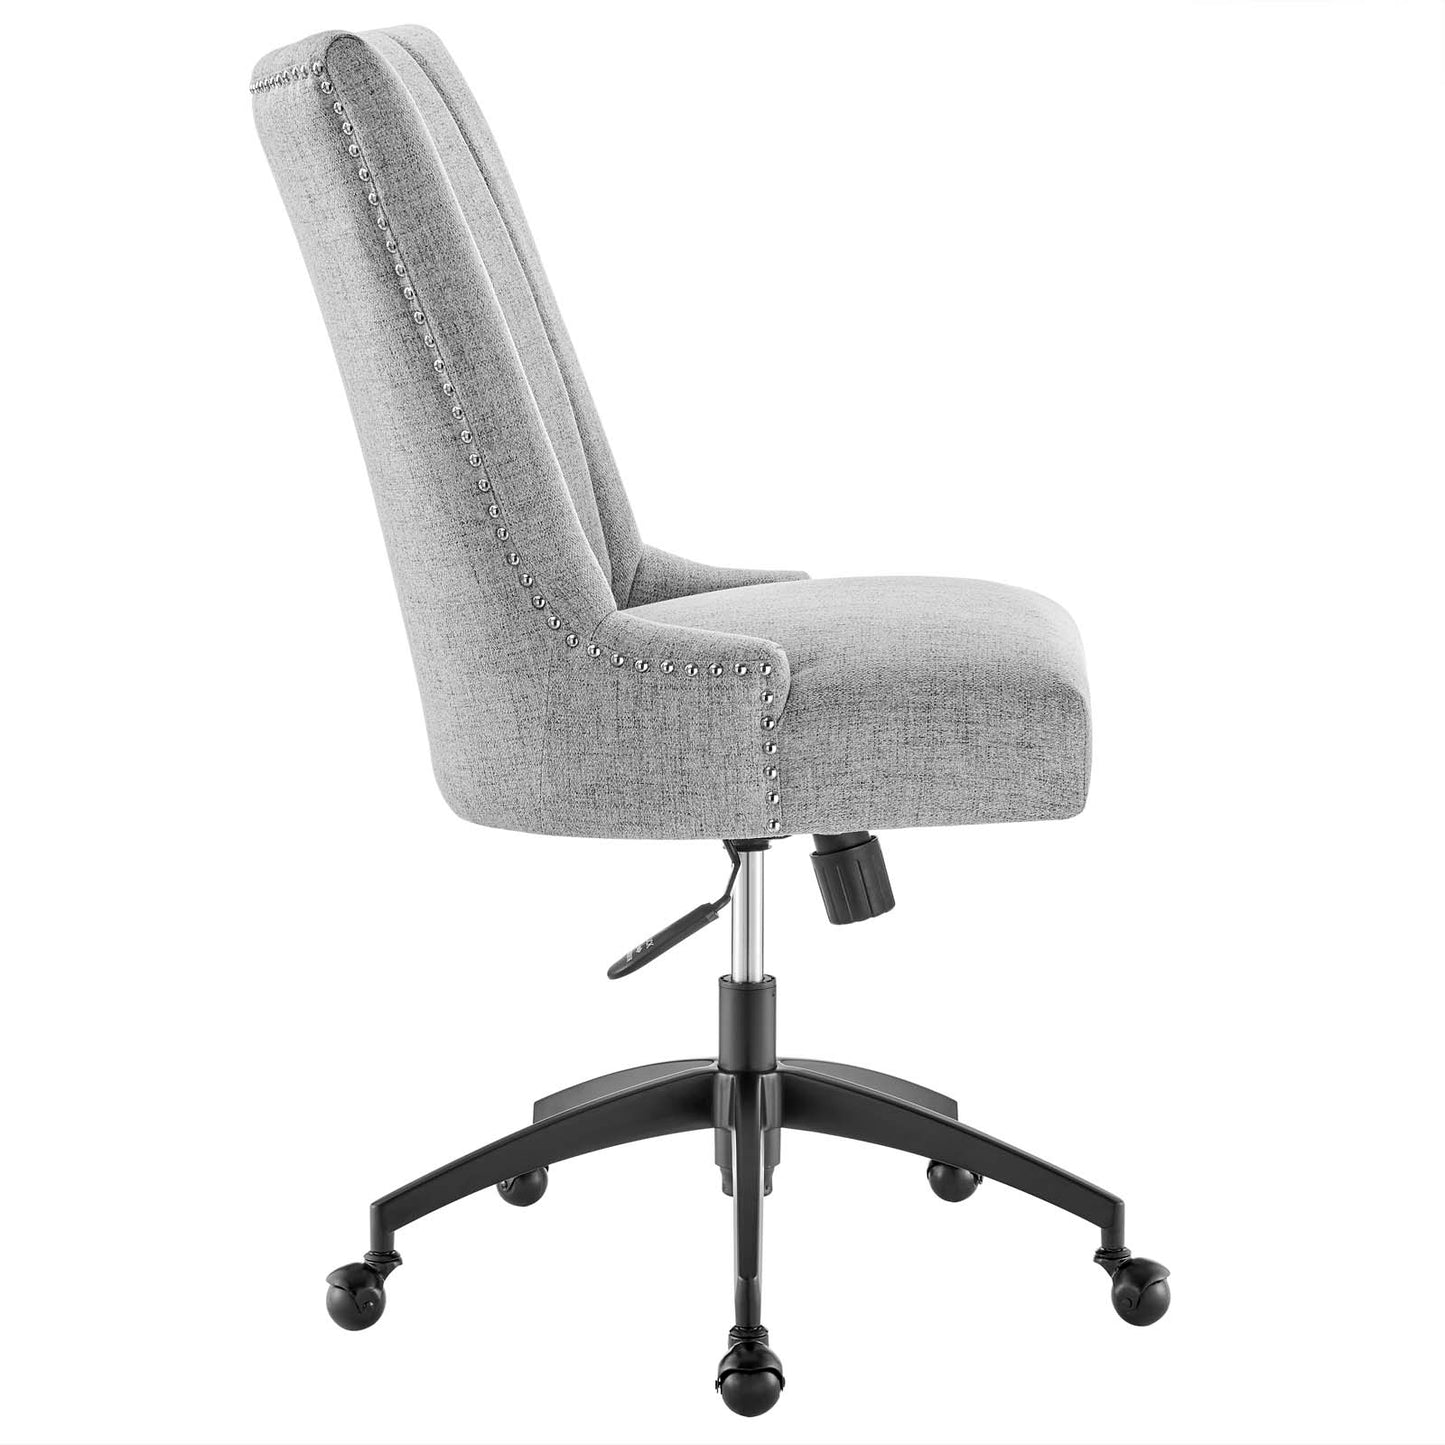 Empower Channel Tufted Fabric Office Chair Black Light Gray EEI-4576-BLK-LGR